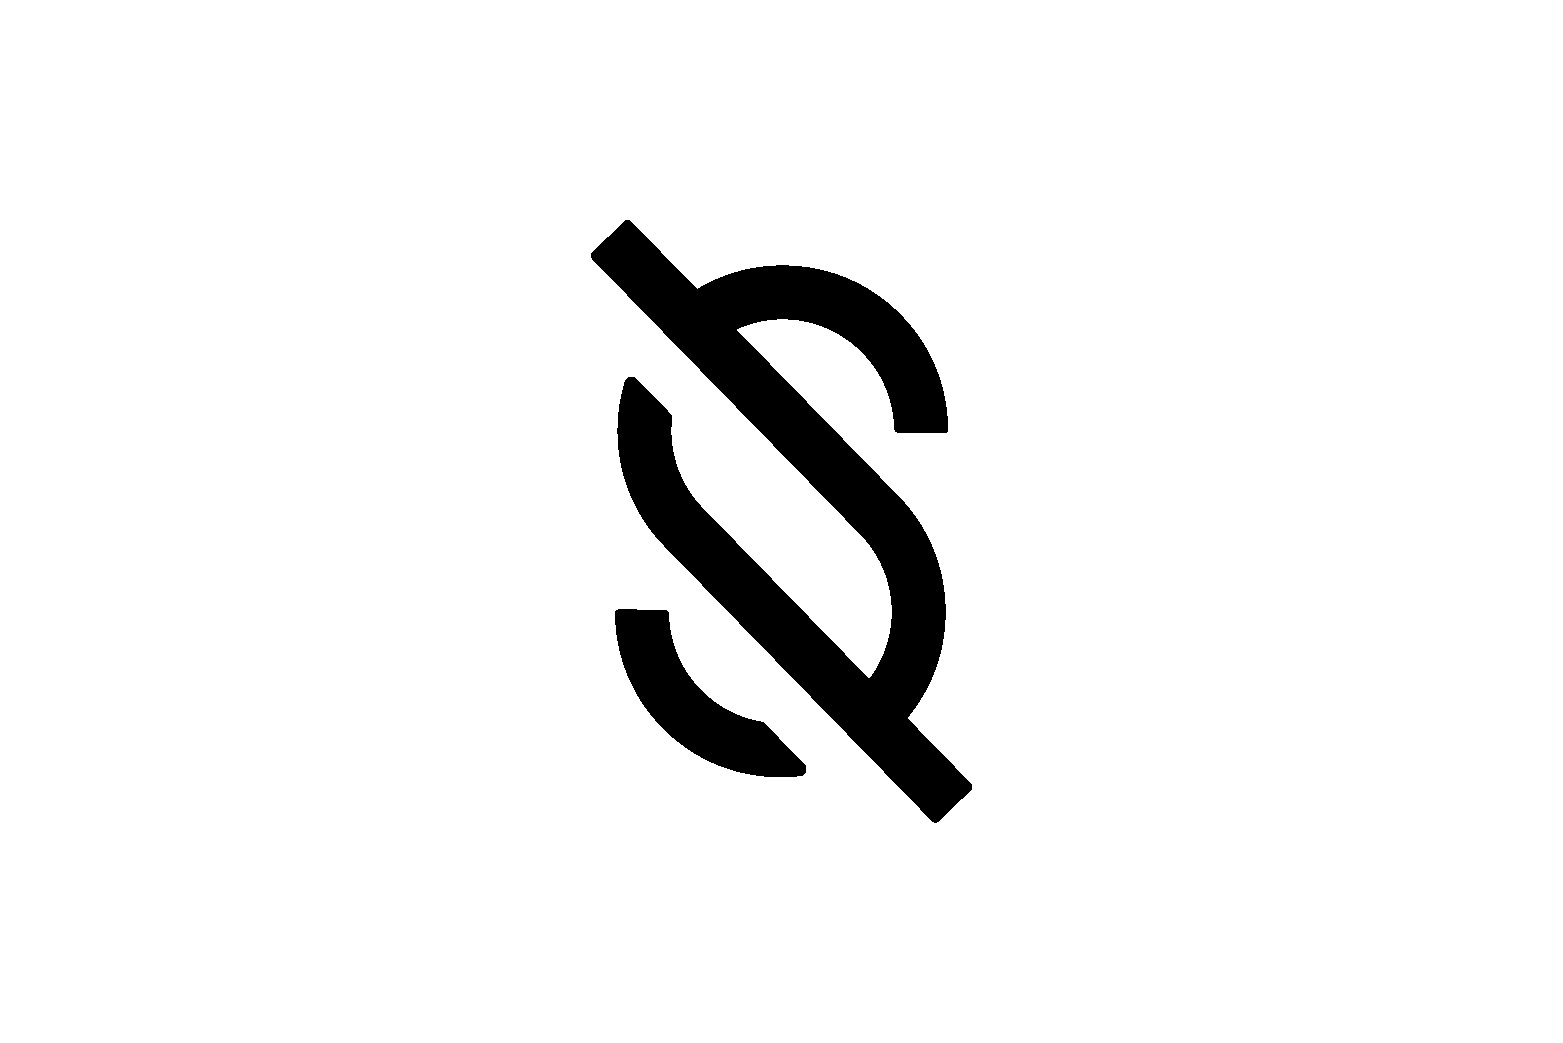 the letter s in different designs